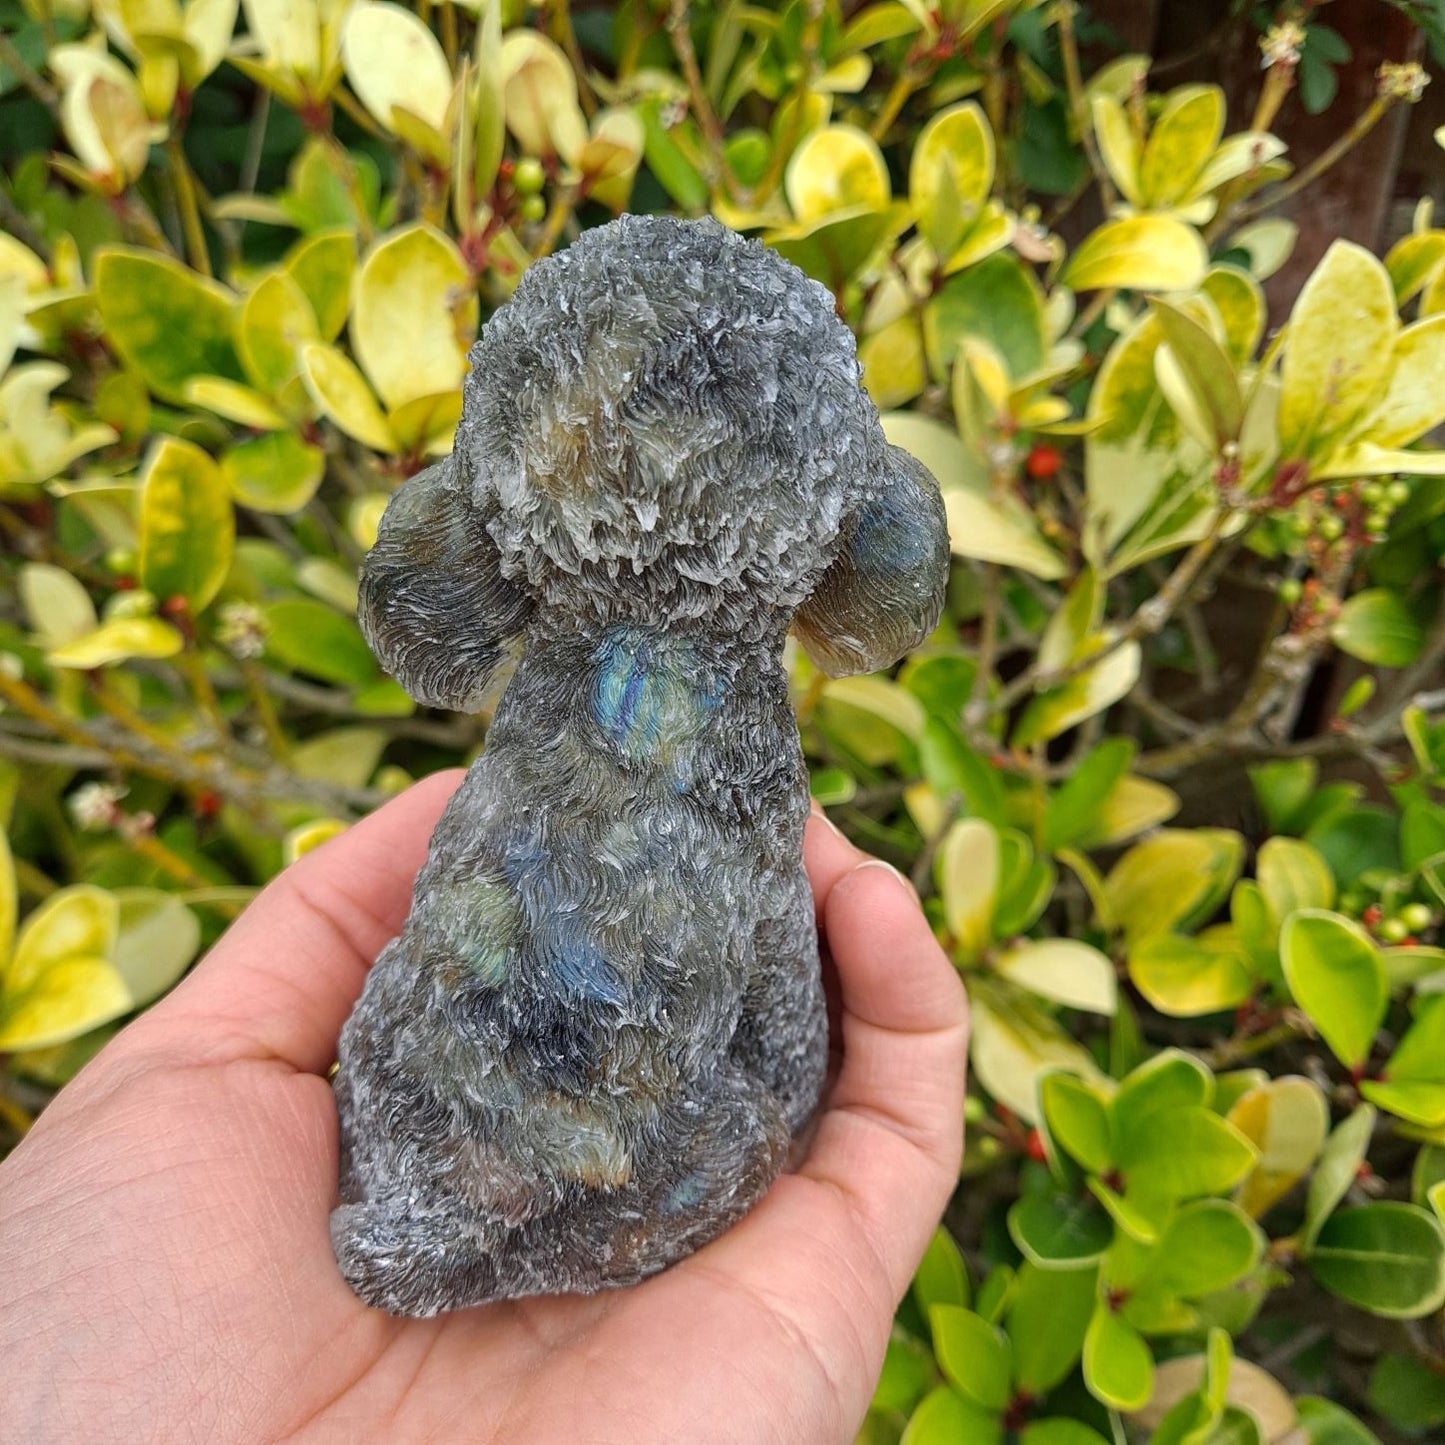 4.5 inch Labradorite crystal Poodle. Unique home accent or meditation companion with captivating iridescence.